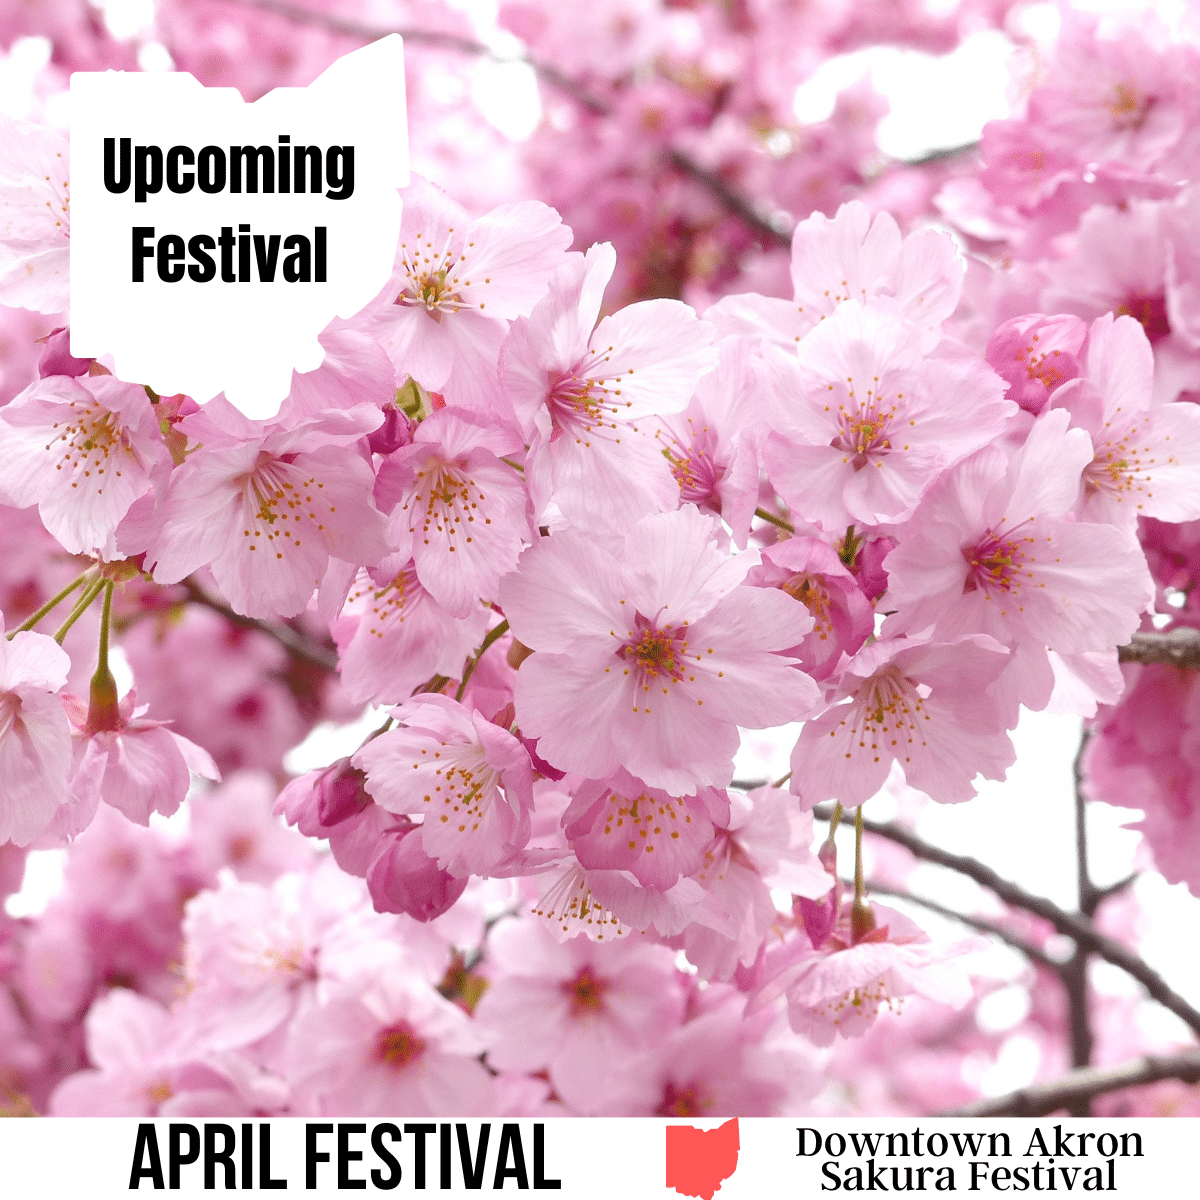 A square image of a photo of a close up of pink cherry blossoms against a white background. A white image of Ohio has text Upcoming Festival. A white strip across the bottom has text April Festival Downtown Akron Sakura Festival.